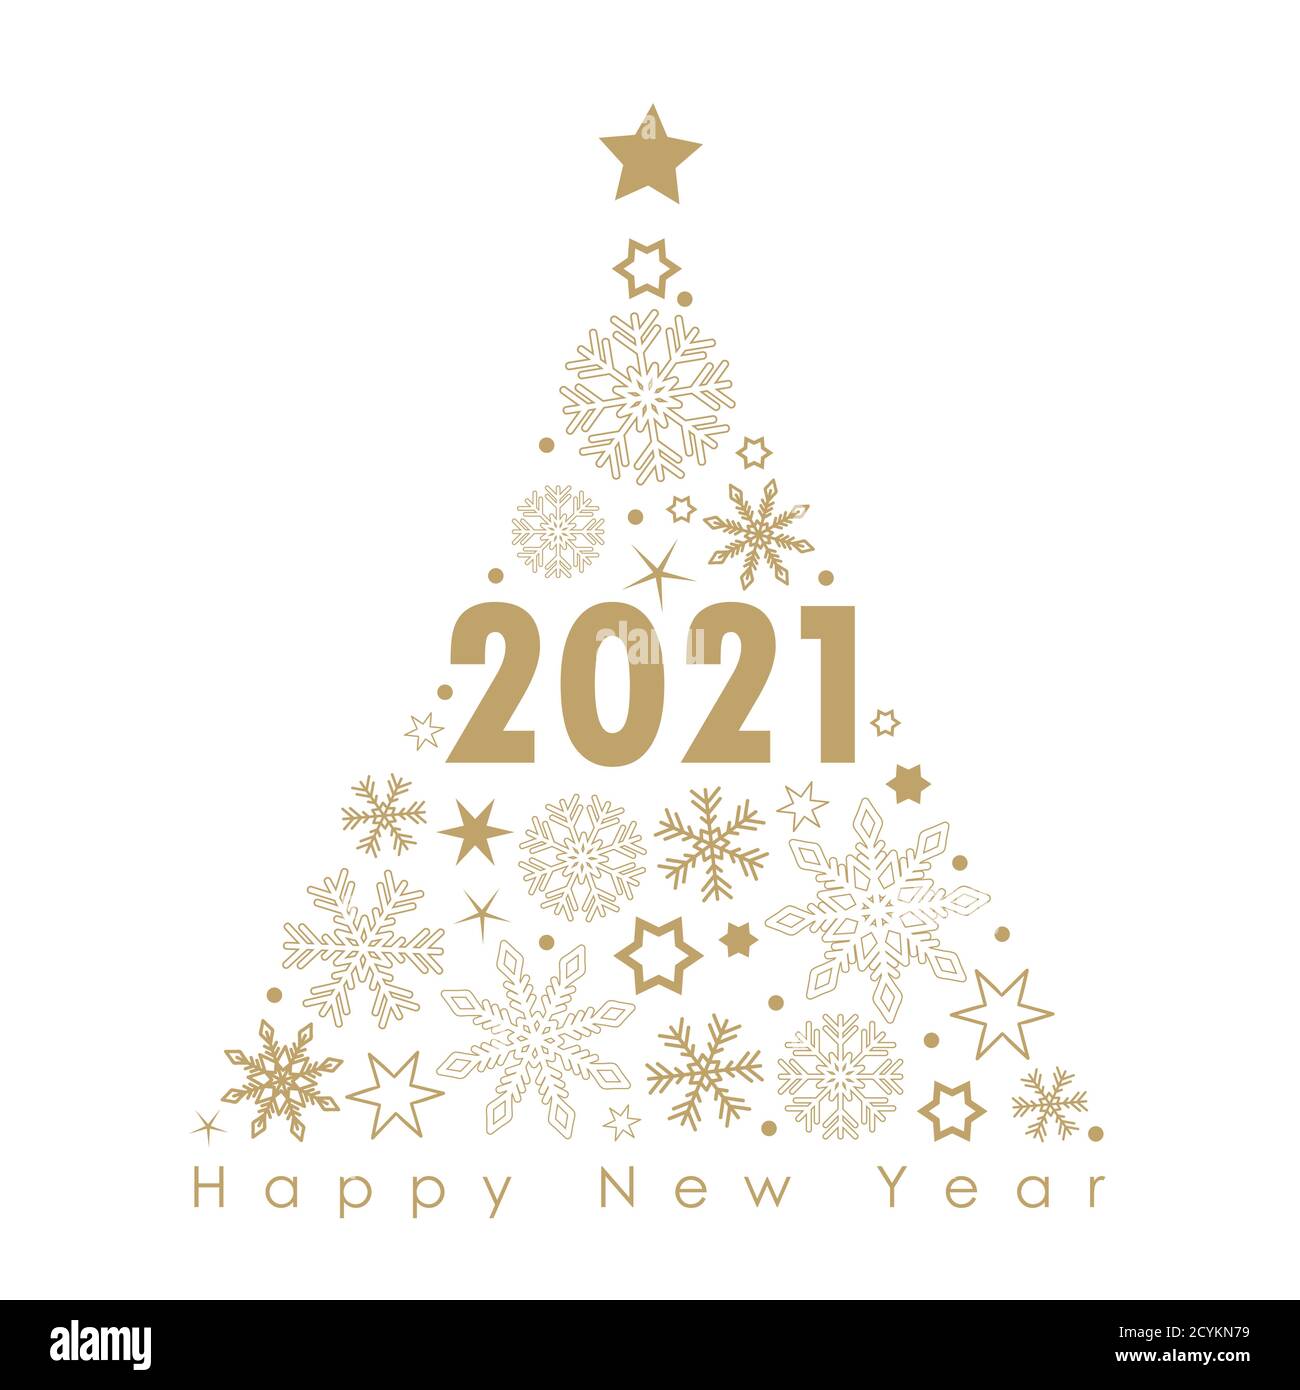 2021 golden christmas tree with snowflakes and stars on a black background vector illustration EPS10 Stock Vector